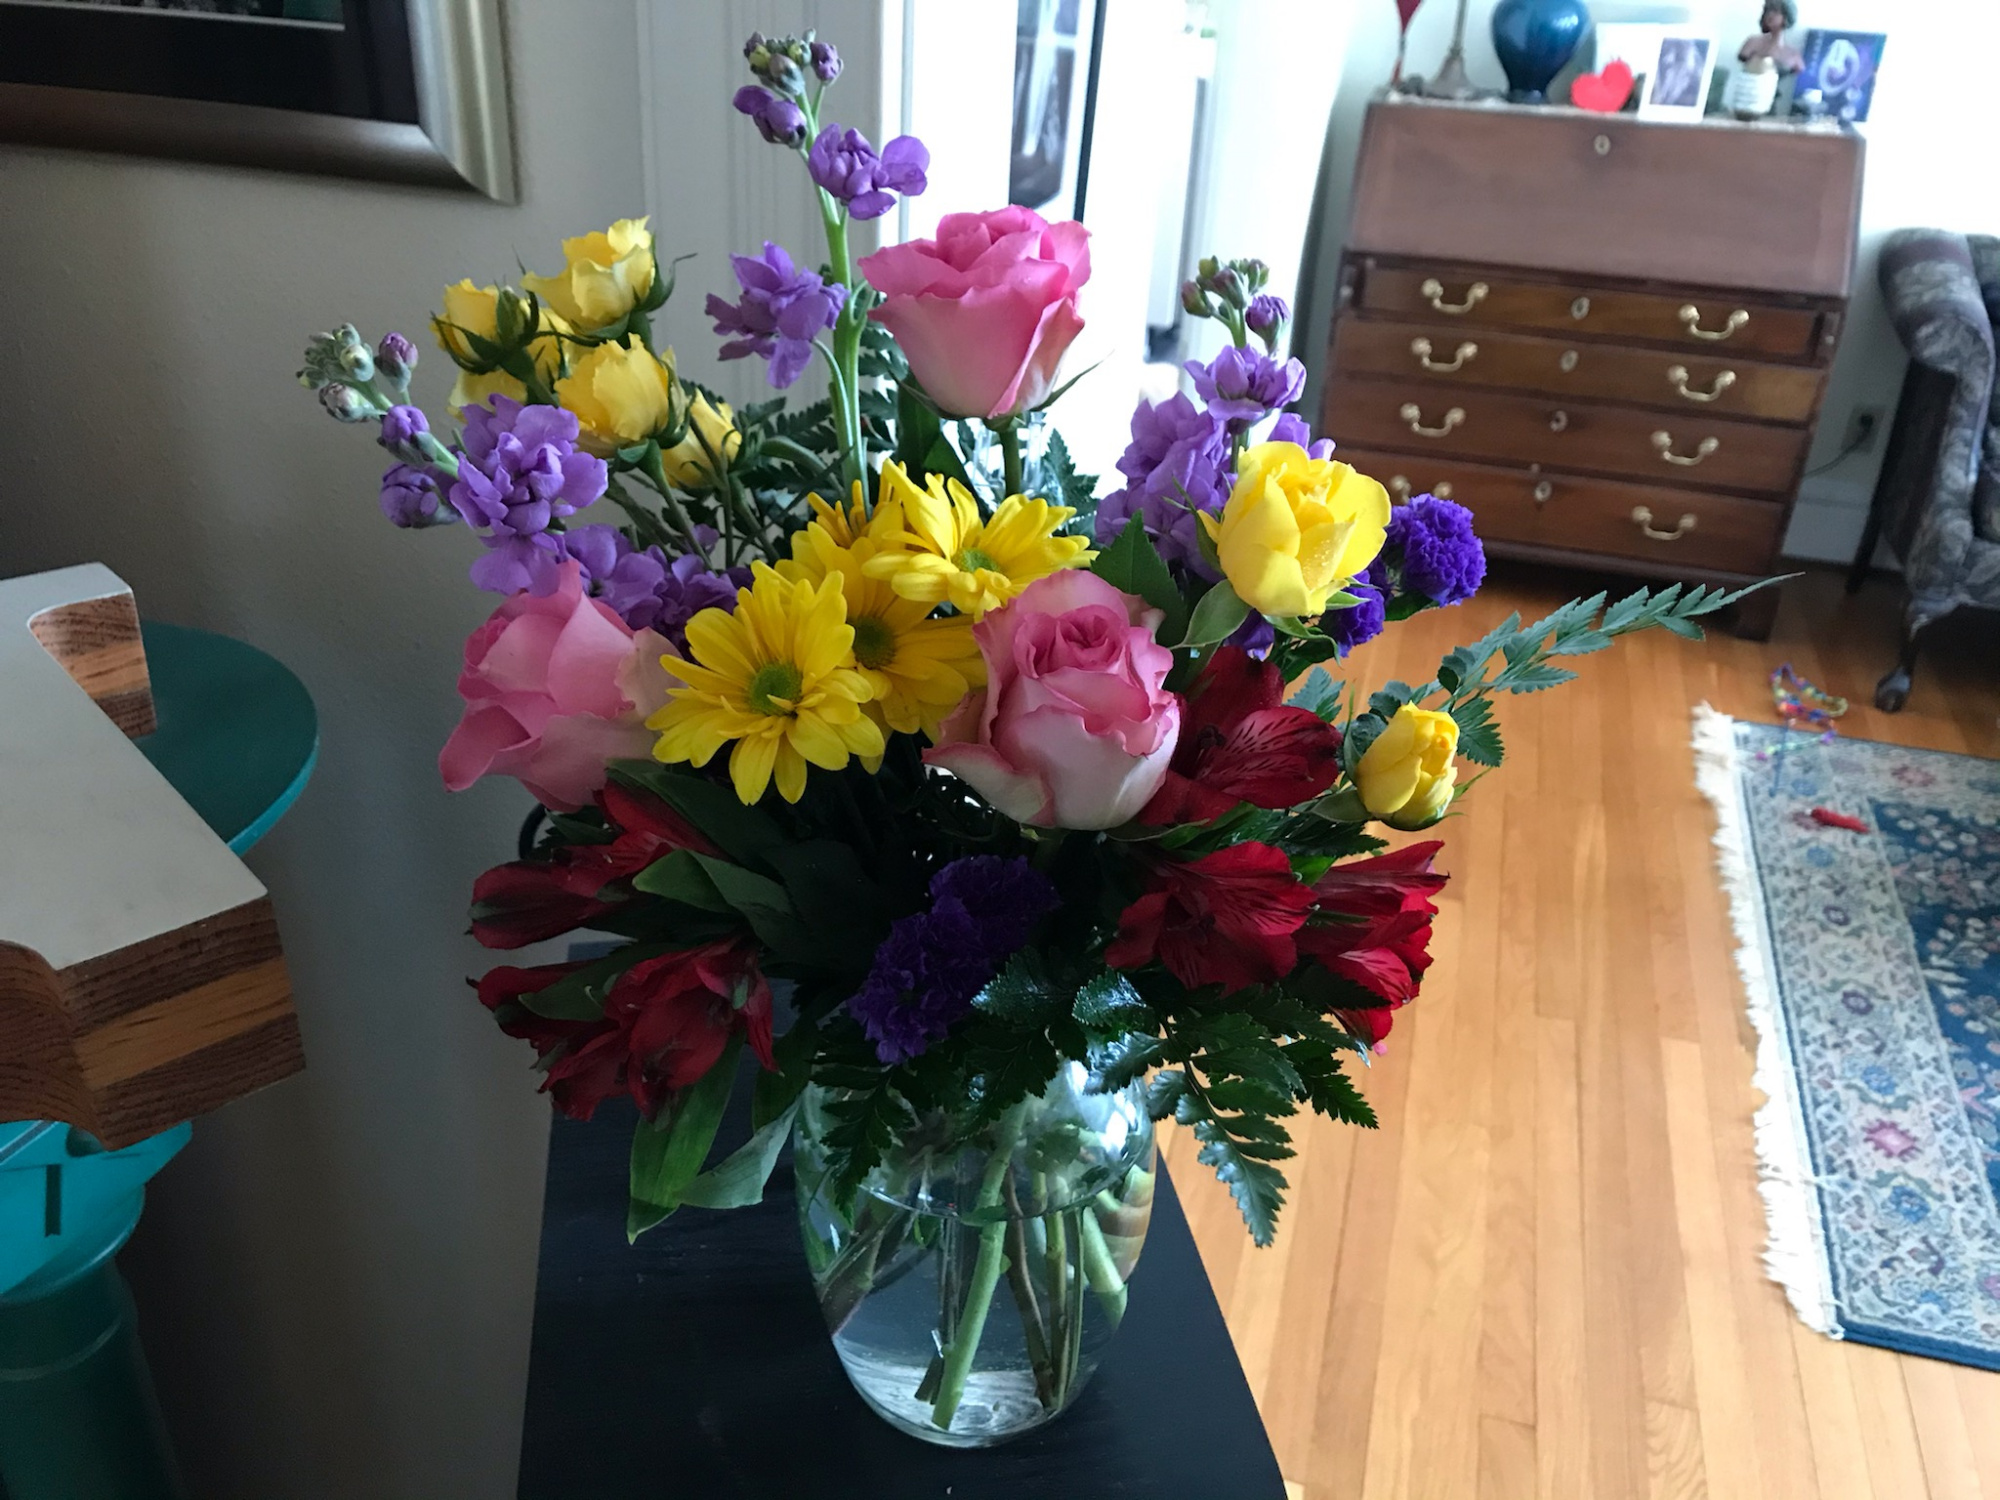 Just one of the many colorful bouquets being delivered to Laura to decorate her house and fill her heart.